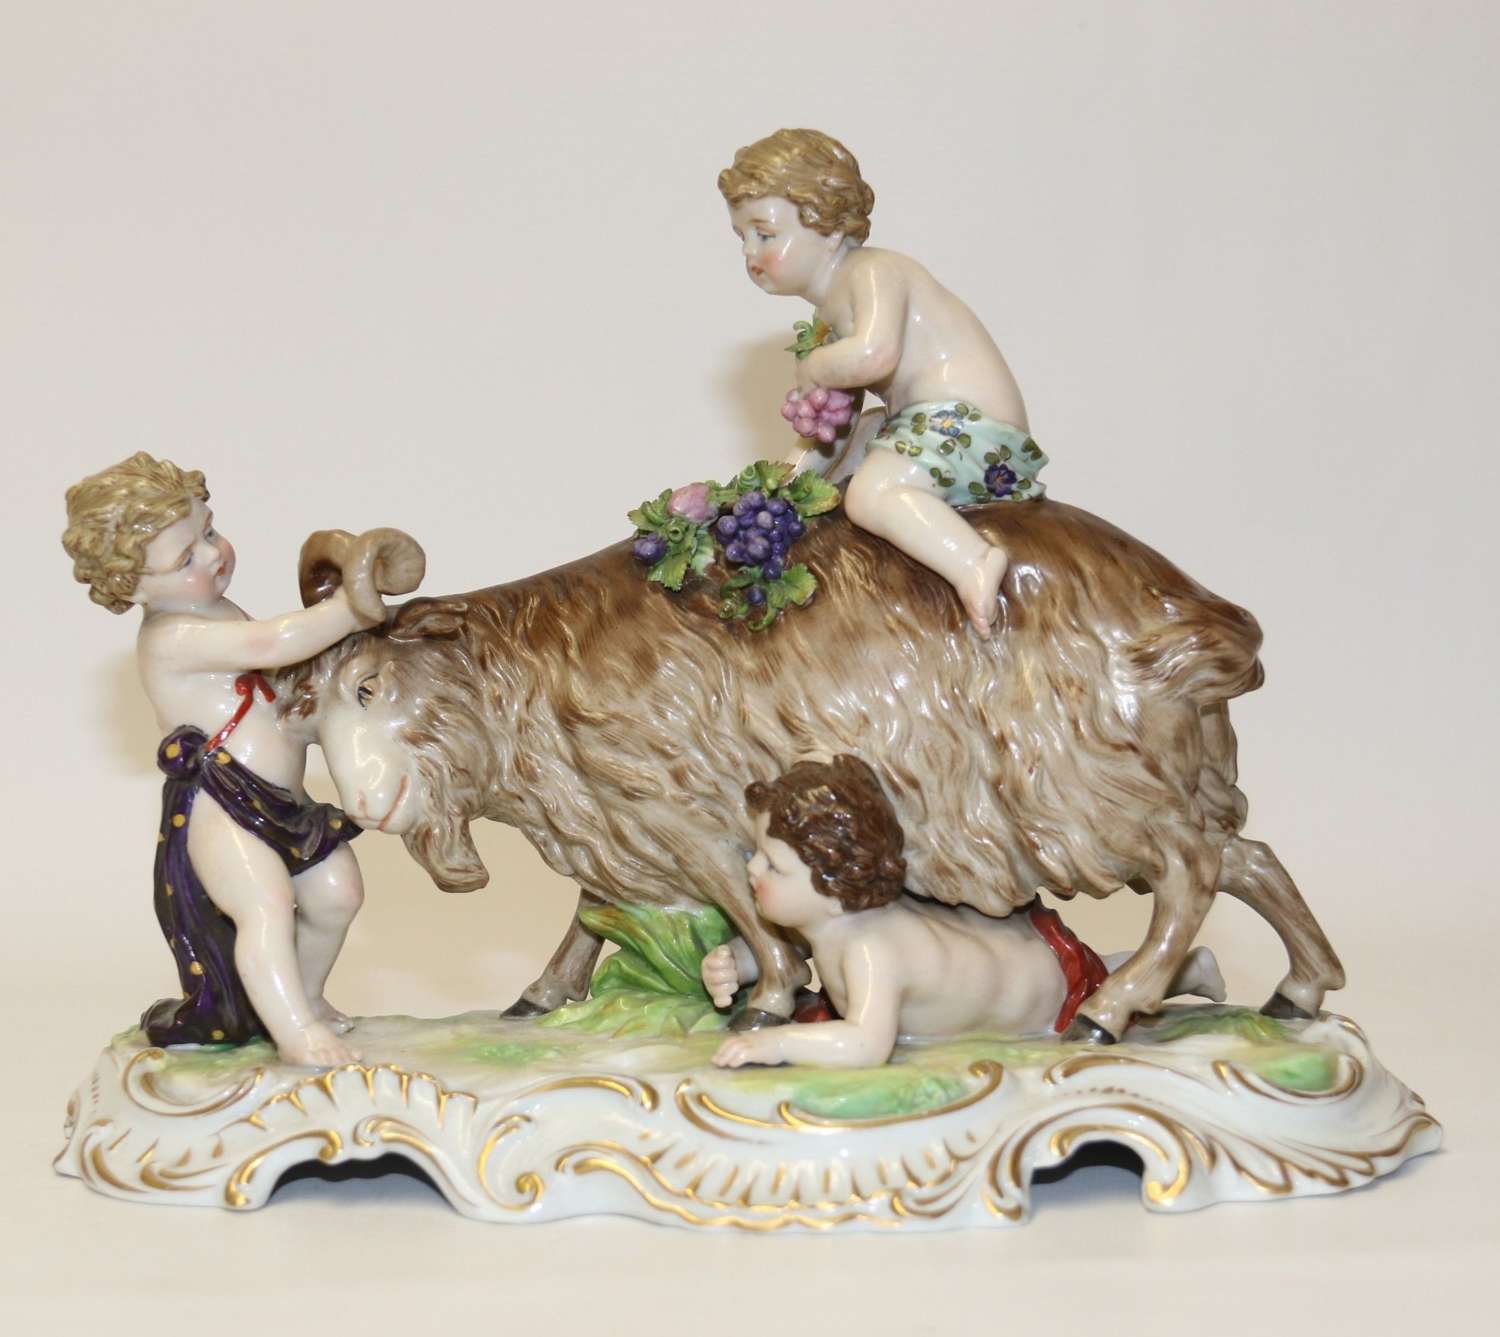 A Fine Porcelain Figure Group Of Three Putti Wrestling With A Goat By Hochst Factory